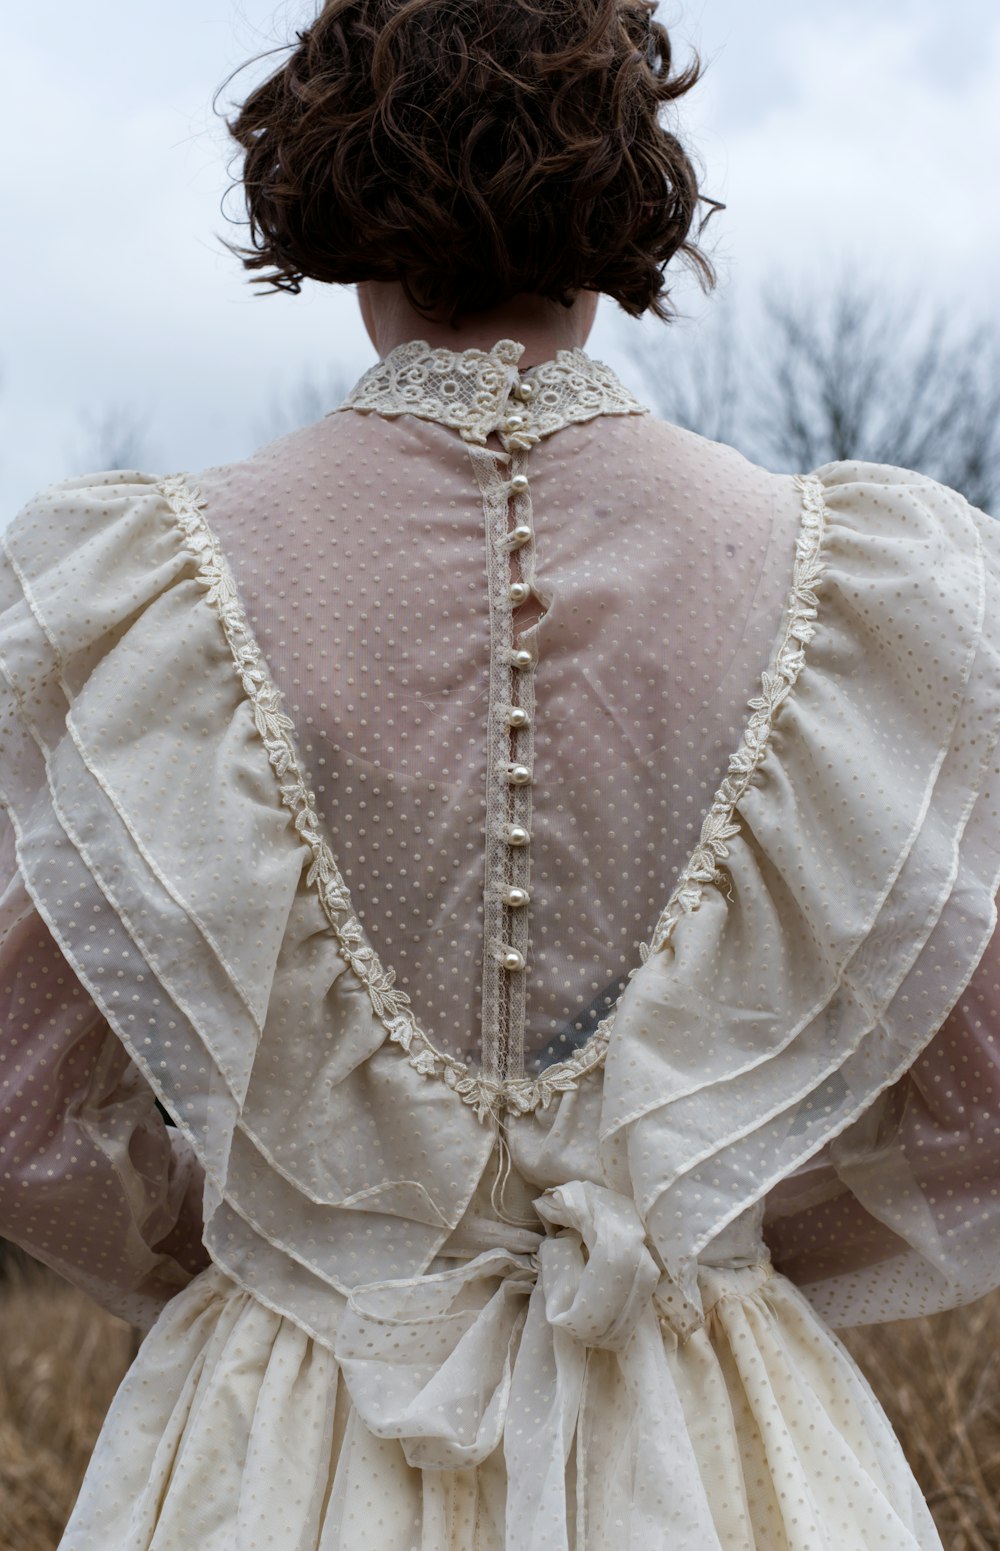 the back of a woman's dress in a field